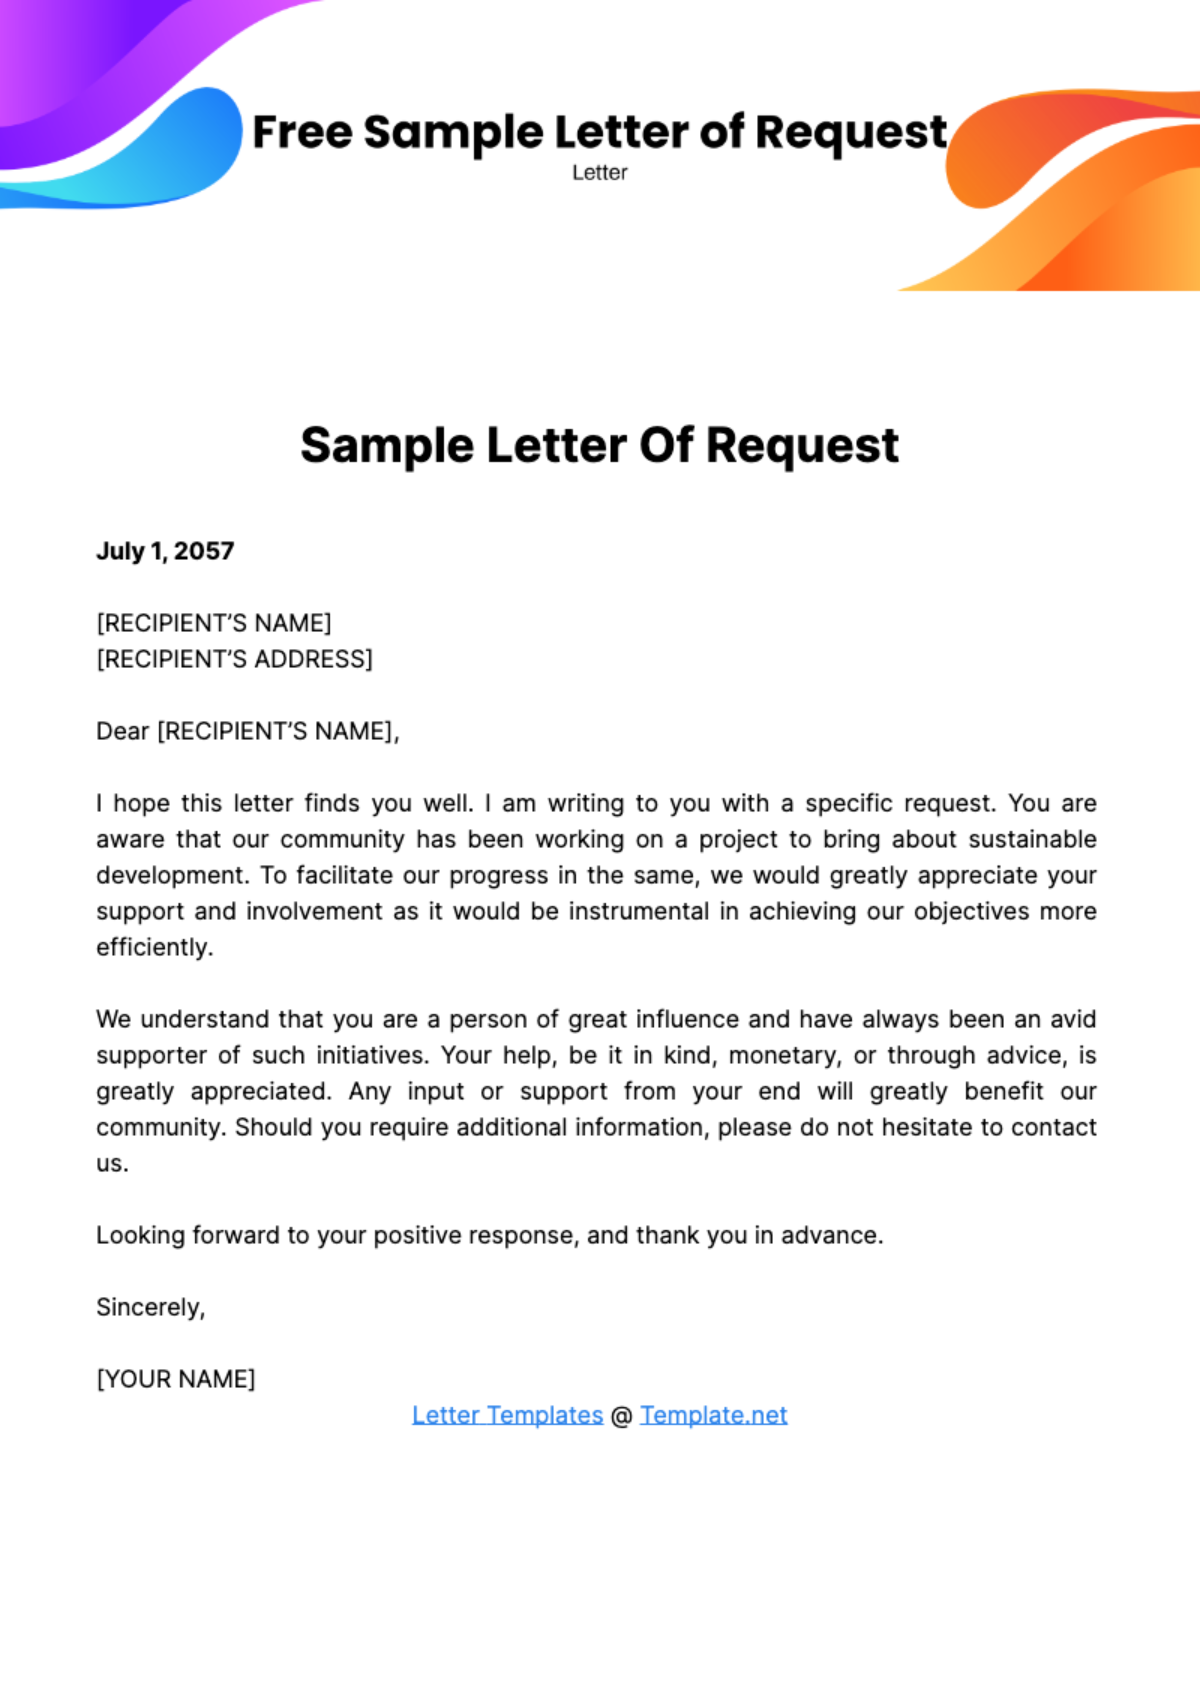 Free Sample Letter of Request Template